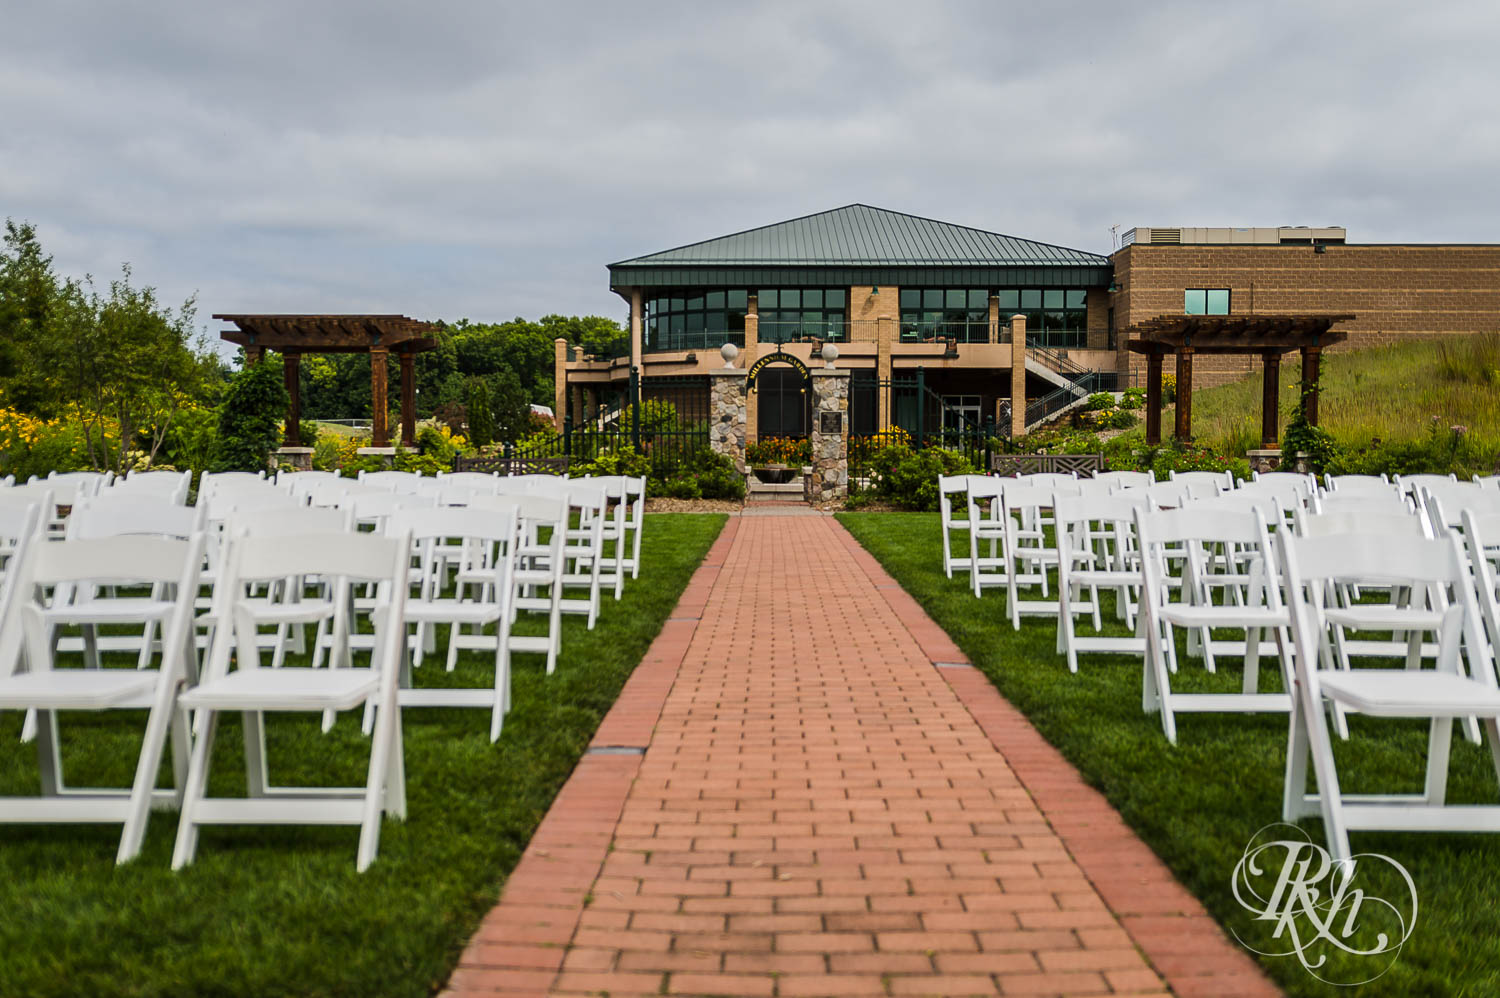 Outdoor wedding ceremony setup at Plymouth Creek Center in Plymouth, Minnesota.